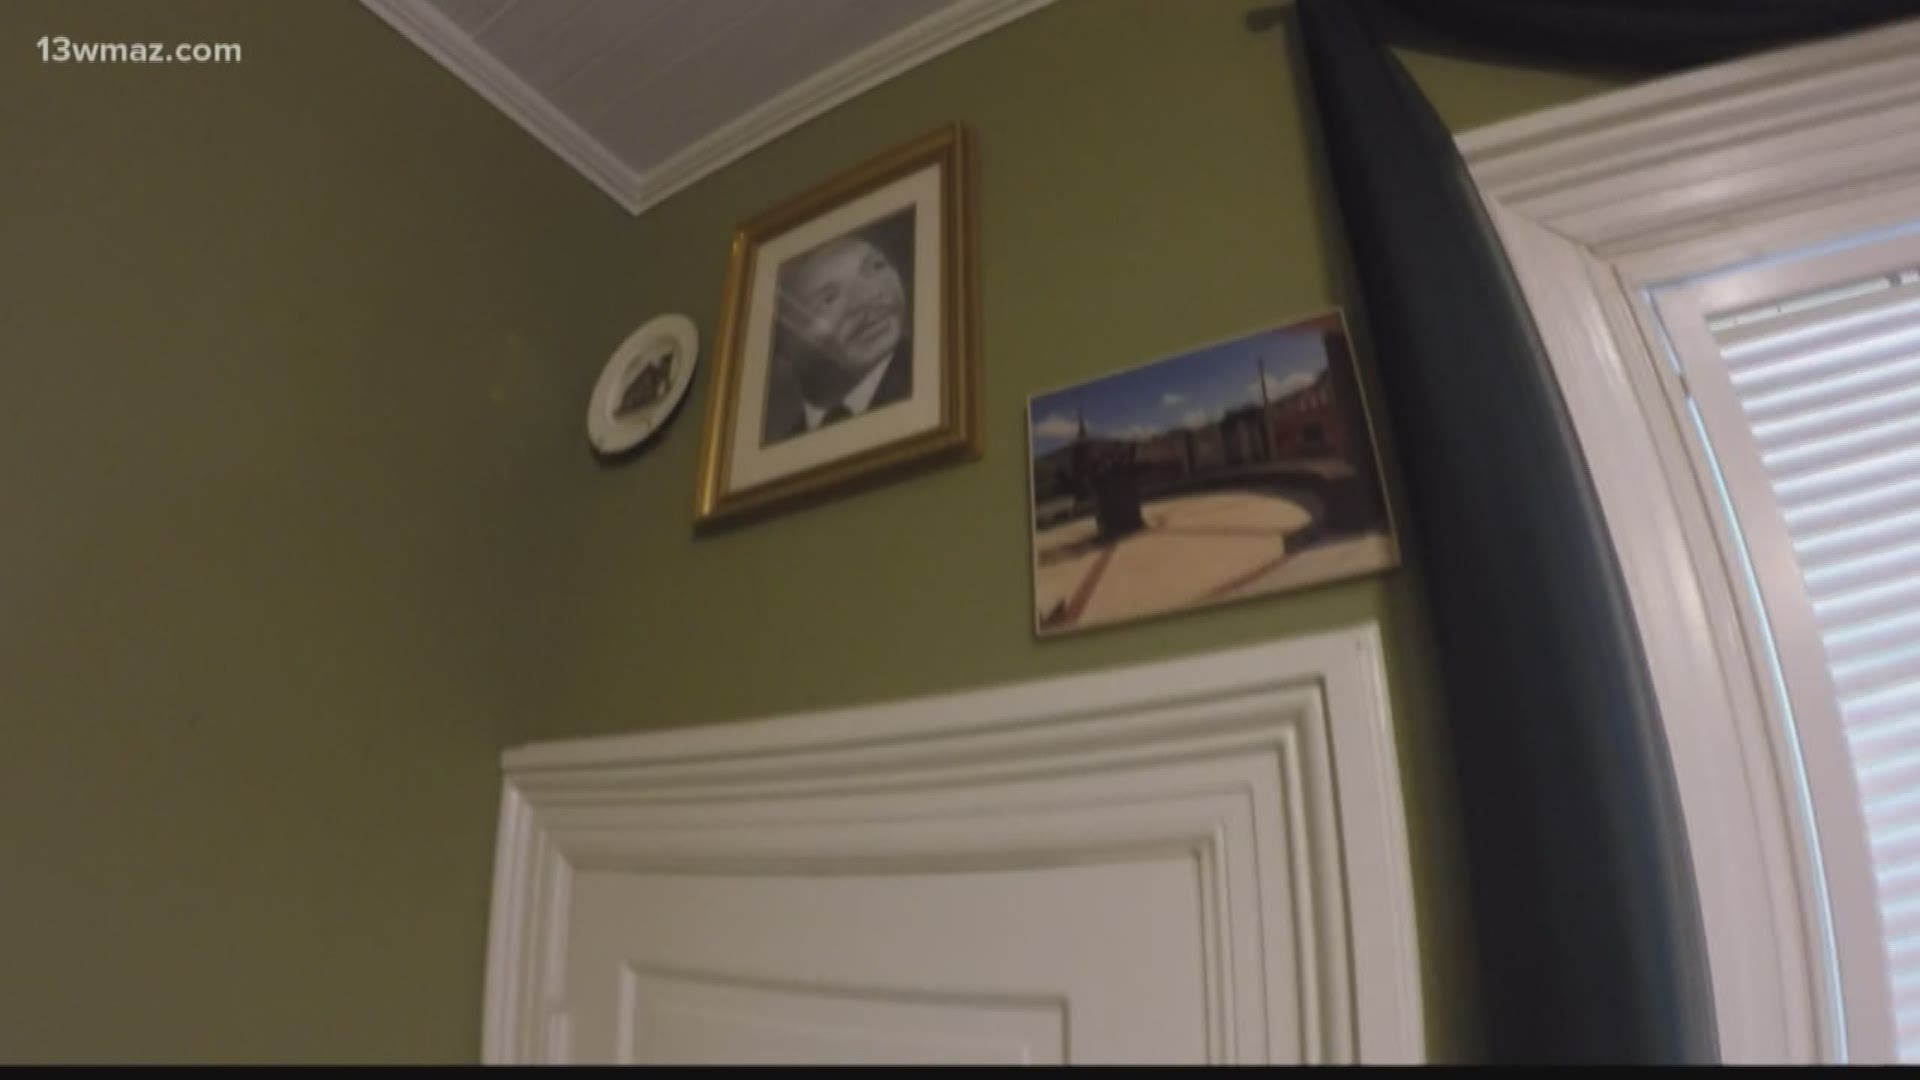 A Dublin bed and breakfast is rededicating one of its suites to honor the city's history.